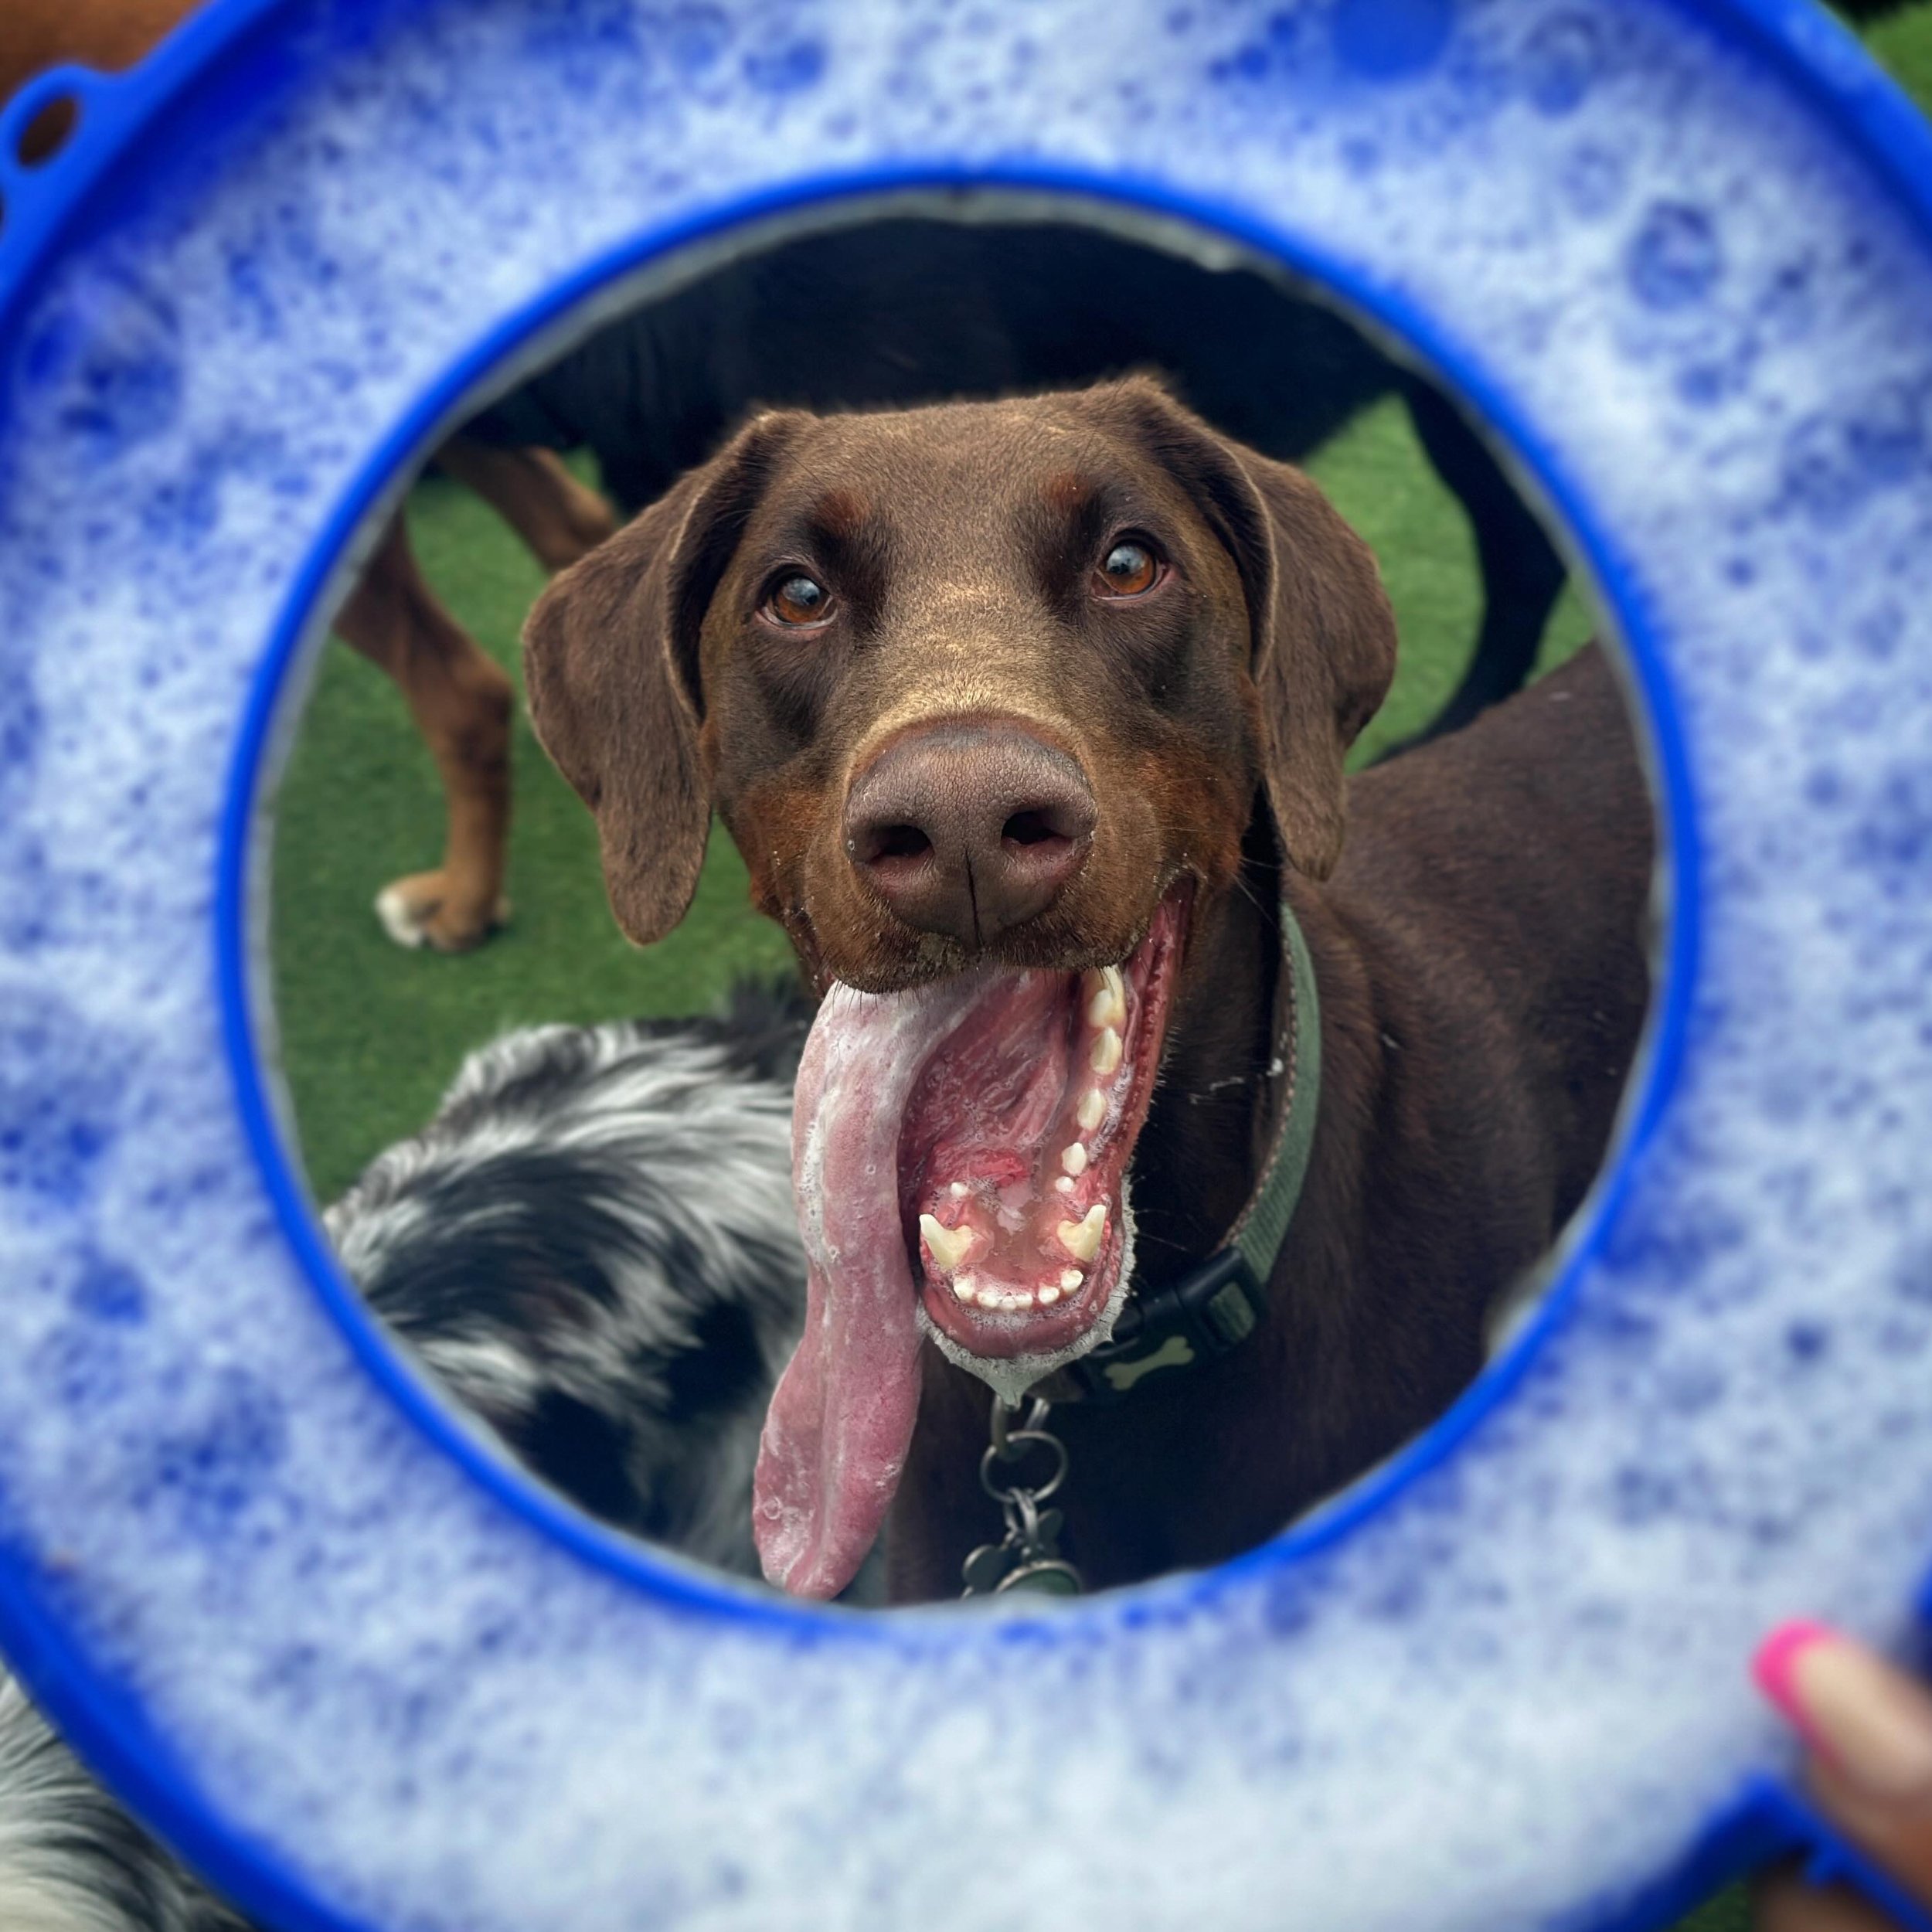 Snoopy does love his bubbles&hellip; what&rsquo;s your dogs favourite activity? 
&mdash;
#dog #doglover #dogsofinstagram #doggydaycare #puppies #pup #puppy #puppylove #puppiesofinstagram #dobermann #doberman #dobie #dobielove #dobermanofinstagram